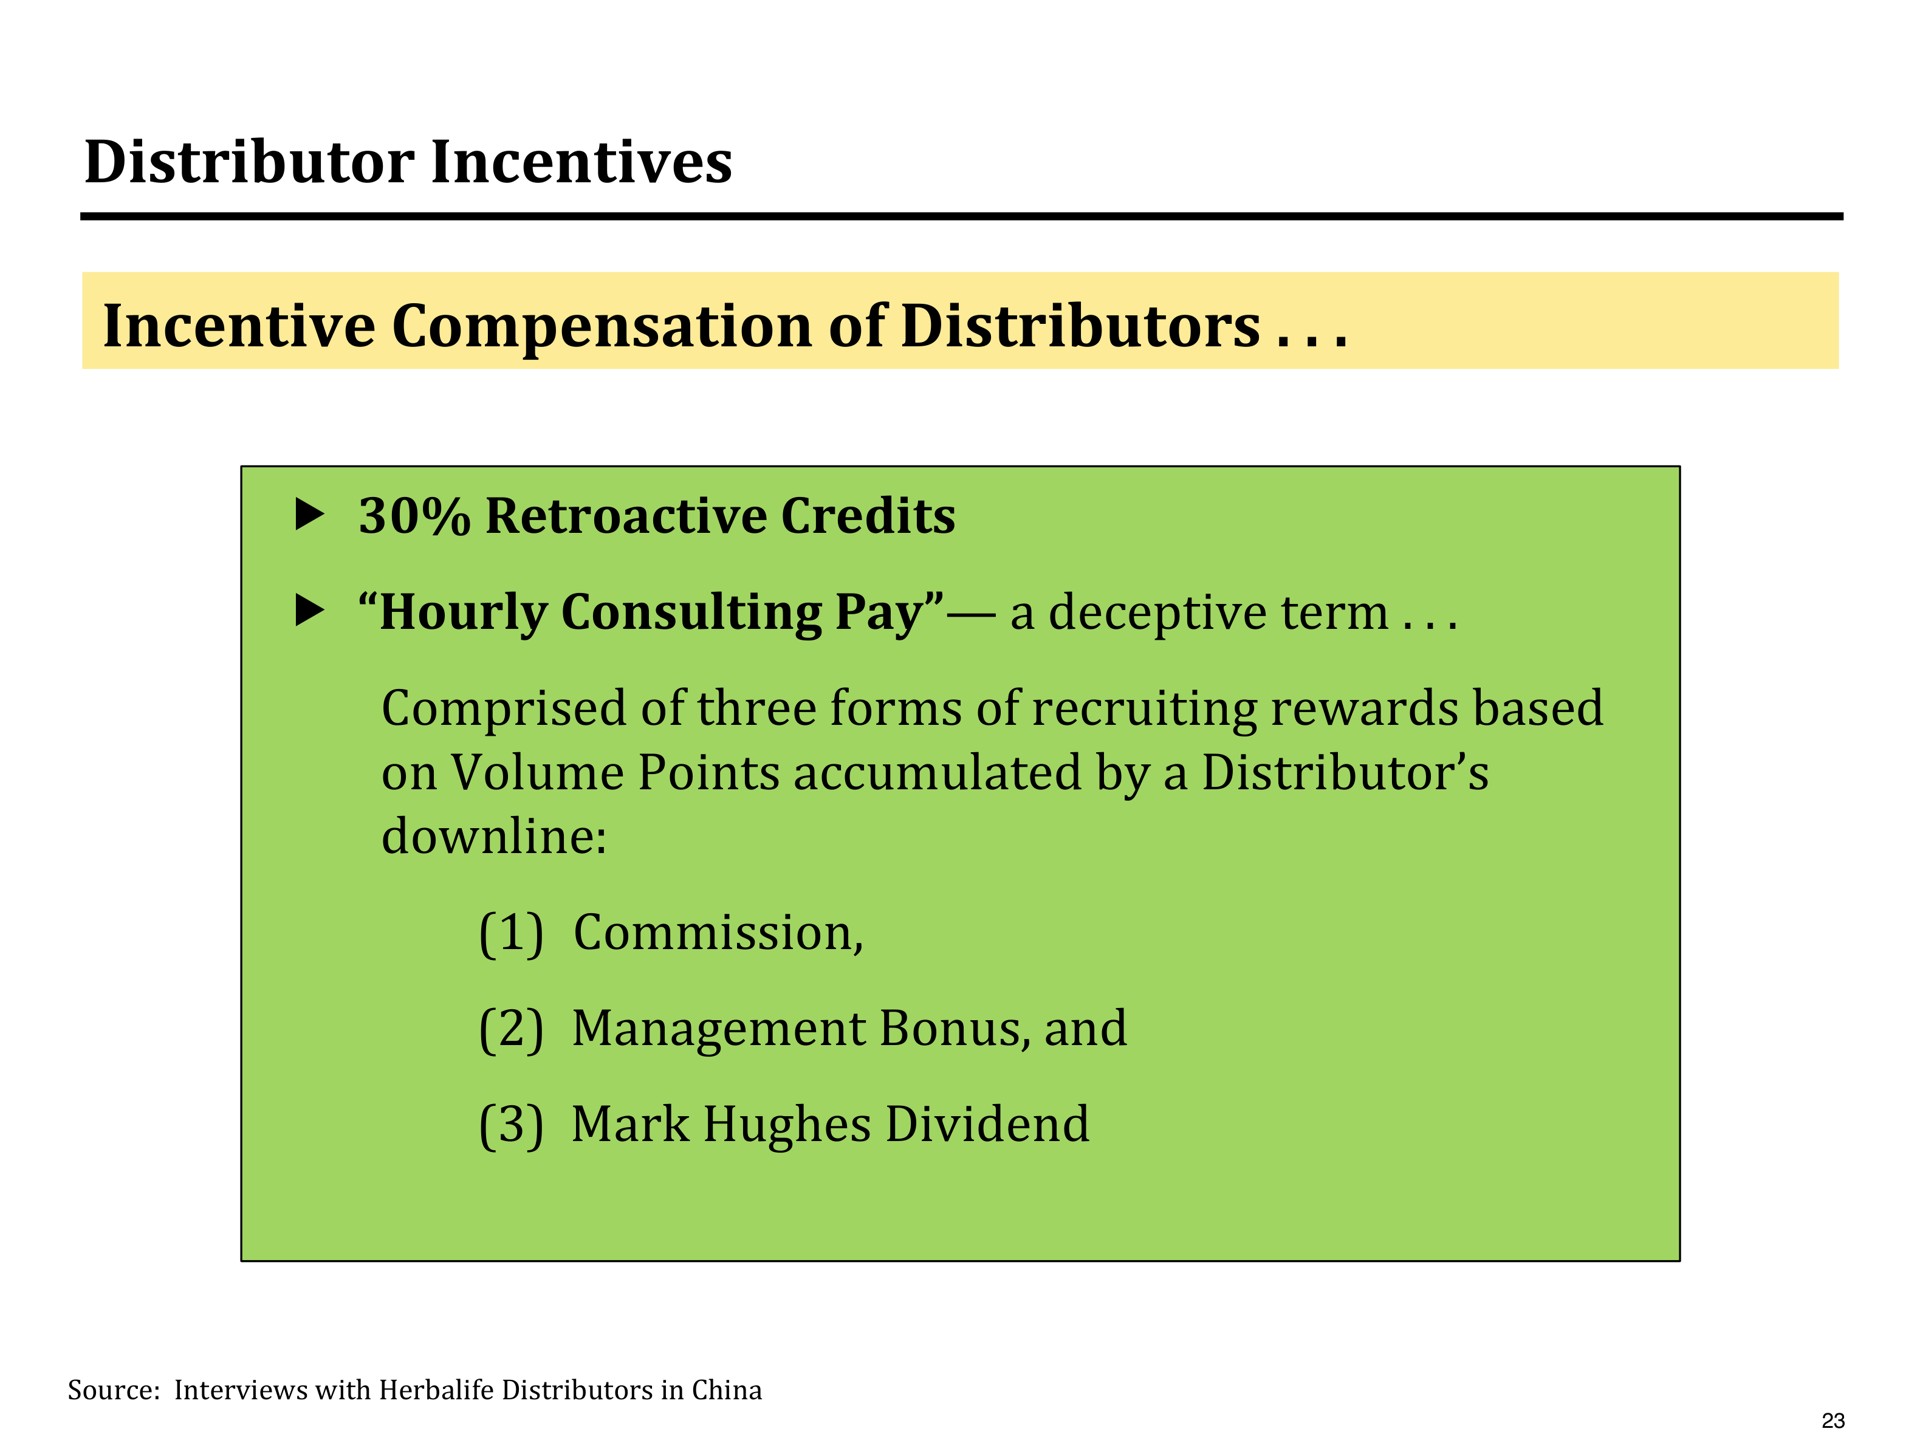 distributor incentives incentive compensation of distributors | Pershing Square